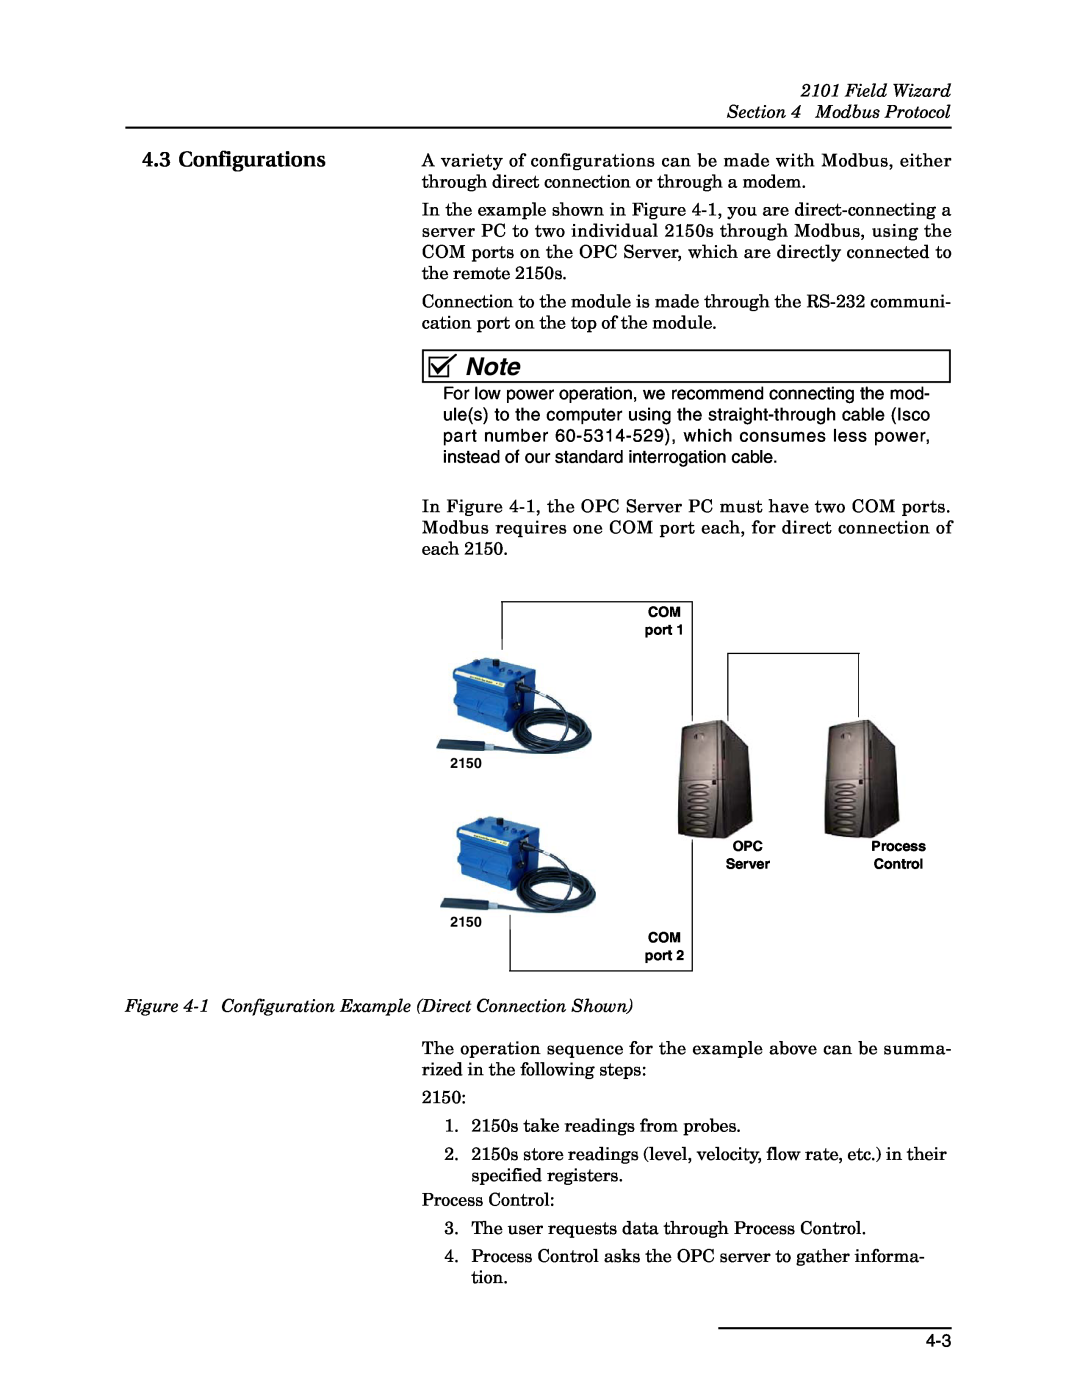 Teledyne 2101 Configurations, Field Wizard Modbus Protocol, 1 Configuration Example Direct Connection Shown 